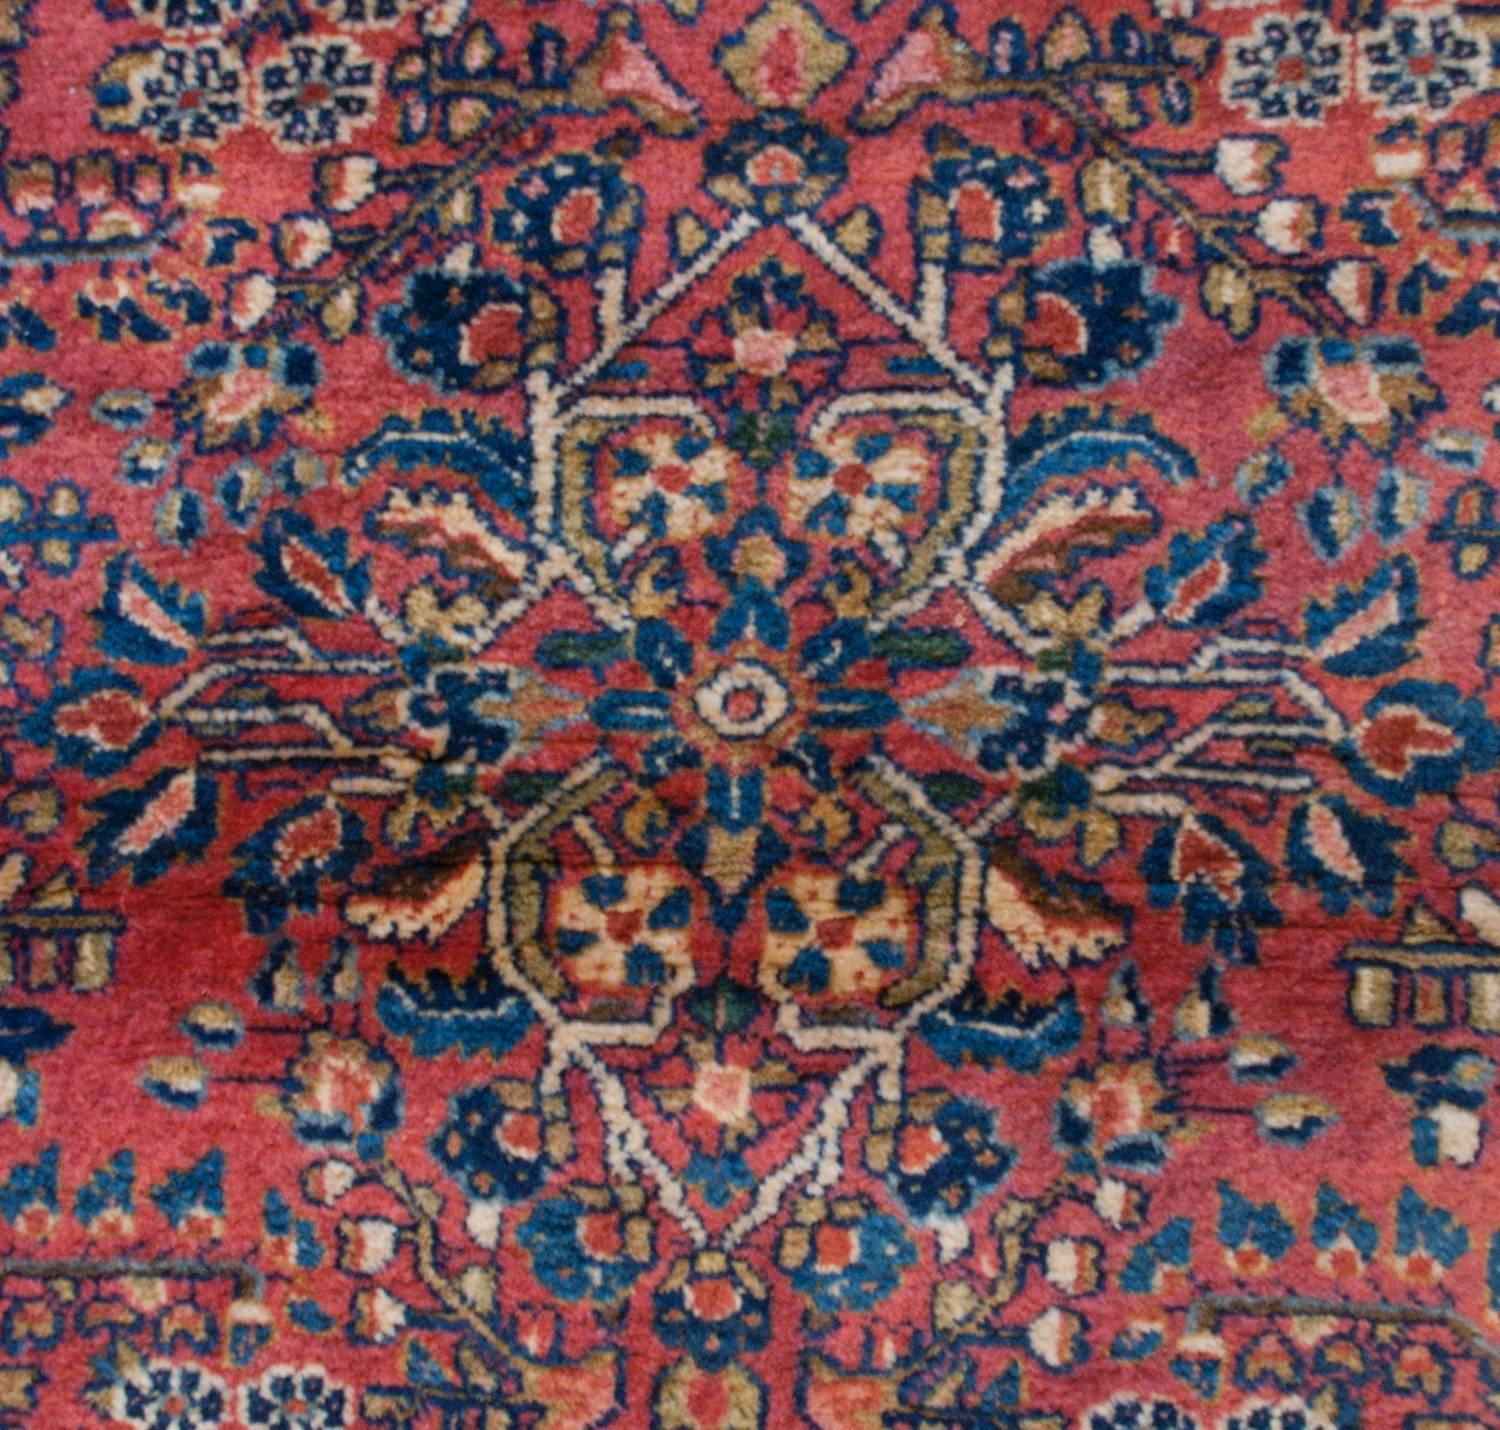 A wonderful early 20th century Persian Sarouk rug with a masterfully woven field of large trees-of-life and myriad floral varieties woven in dark and light indigo, crimson, and cream naturally dyed wool on a deep cranberry field. The border is wide